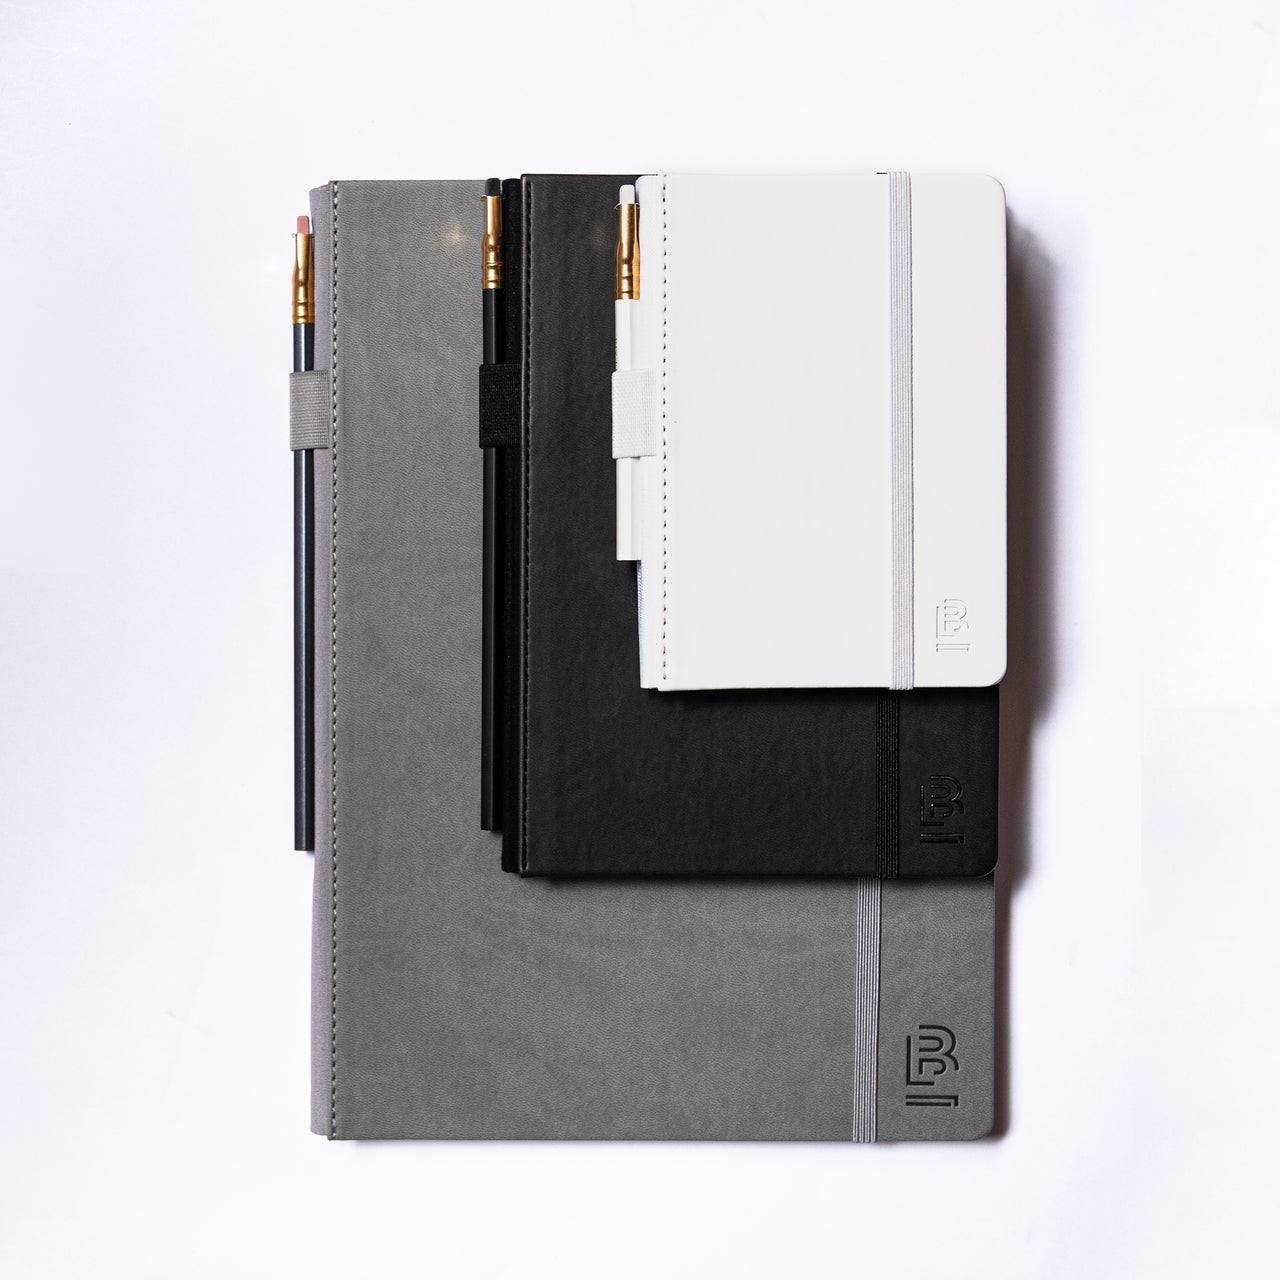 The A6, small size notebook measures 4 inches wide (approximately 4 1/2 including pencil in loop) by 6 inches high (105x148 mm). 

